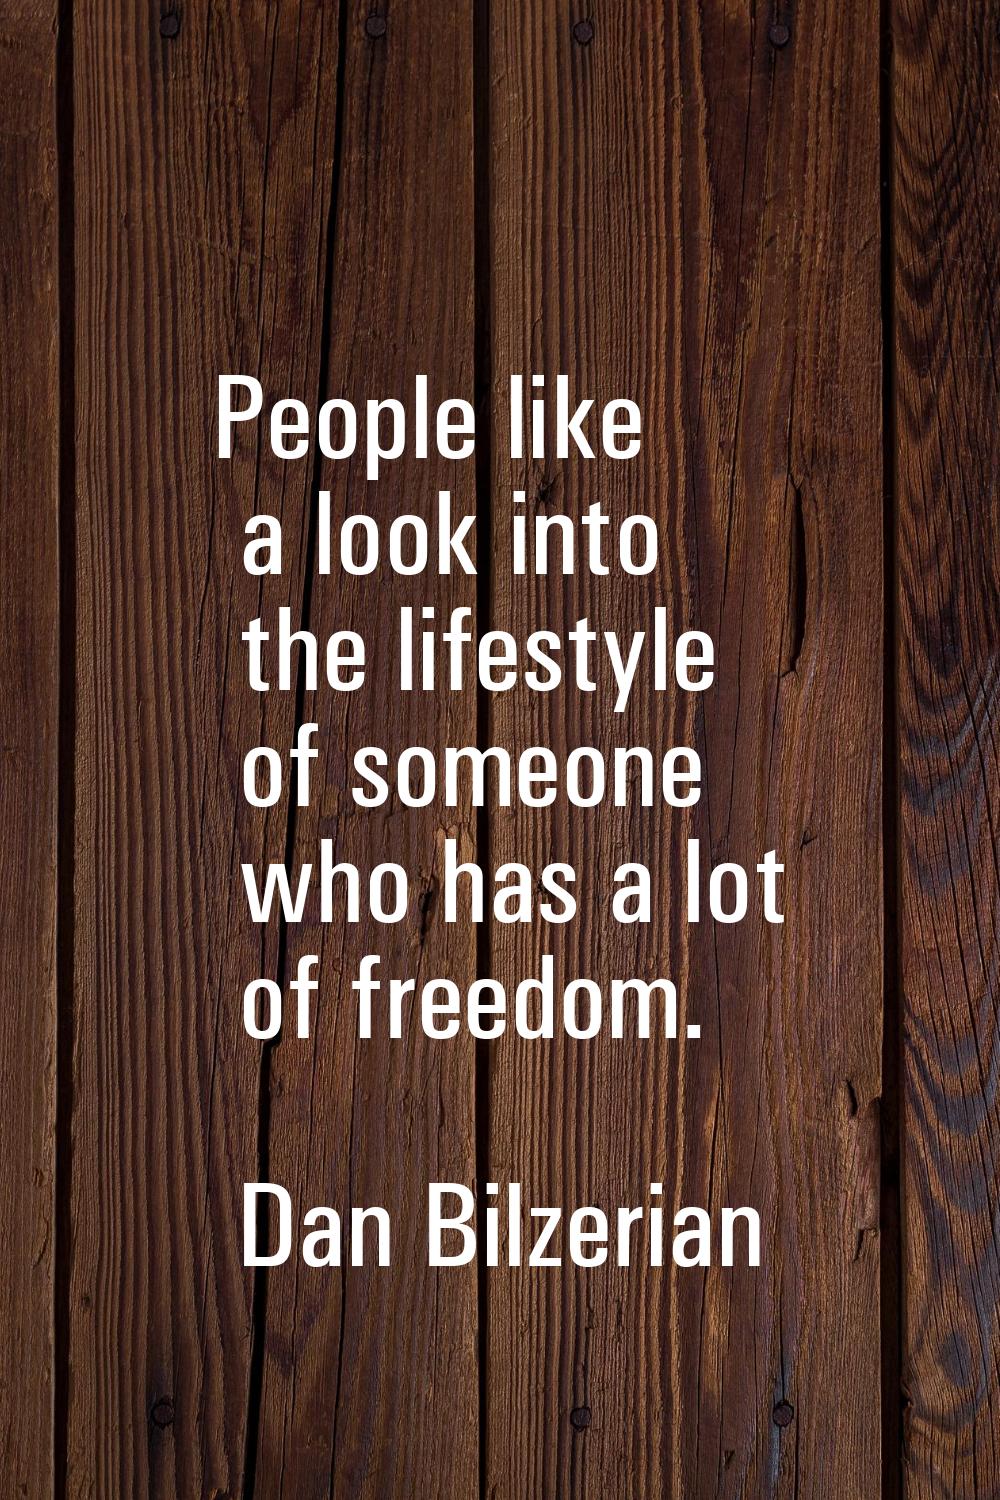 People like a look into the lifestyle of someone who has a lot of freedom.